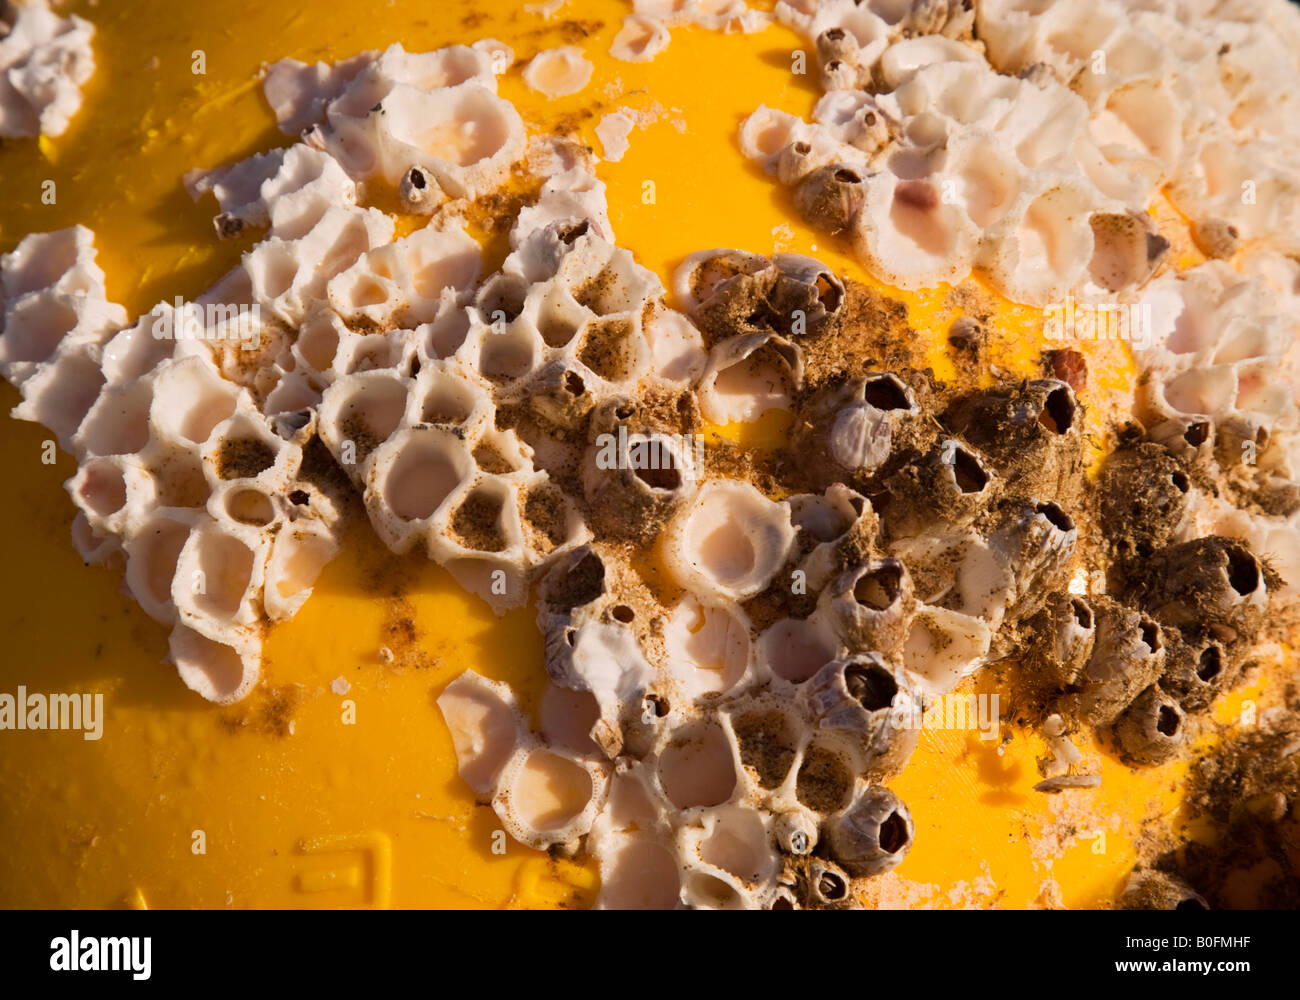 Barnacles on a Buoy Stock Photo